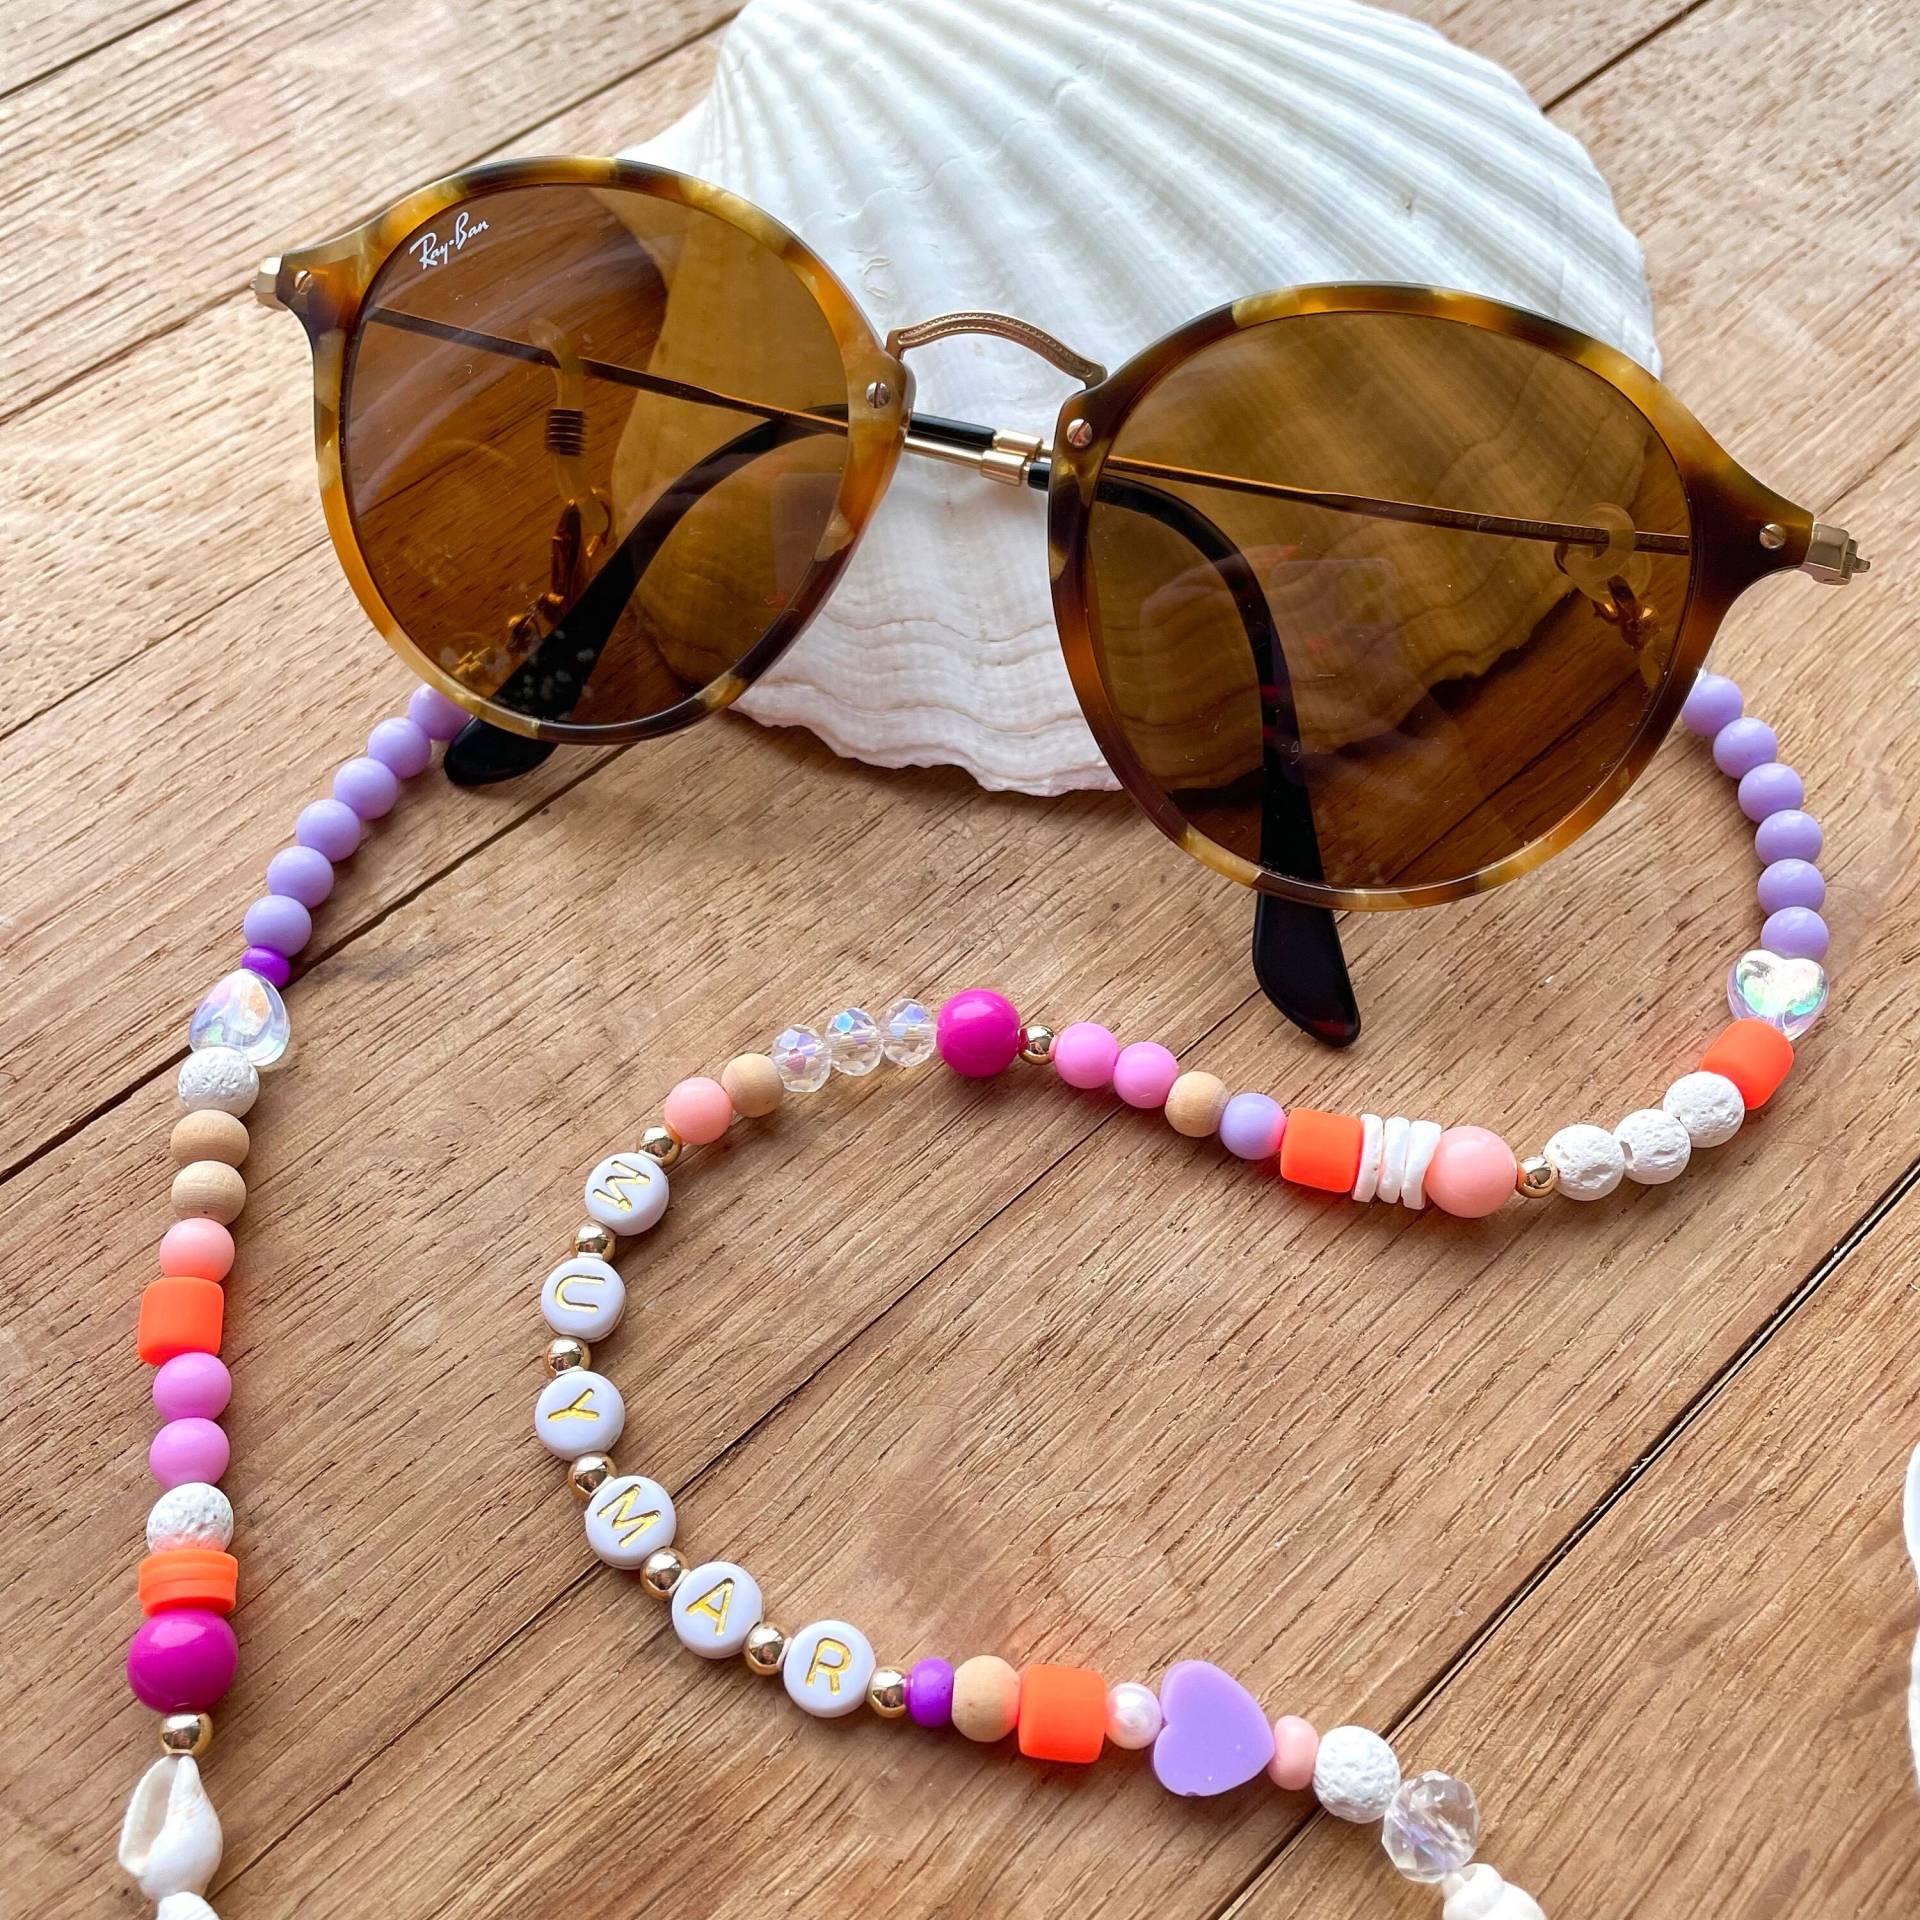 Personalizeable Sunglass Chain Accessoires Mask Holder For Glasses Shells Freshwater Pearls Strap Personalized Gift von muymar